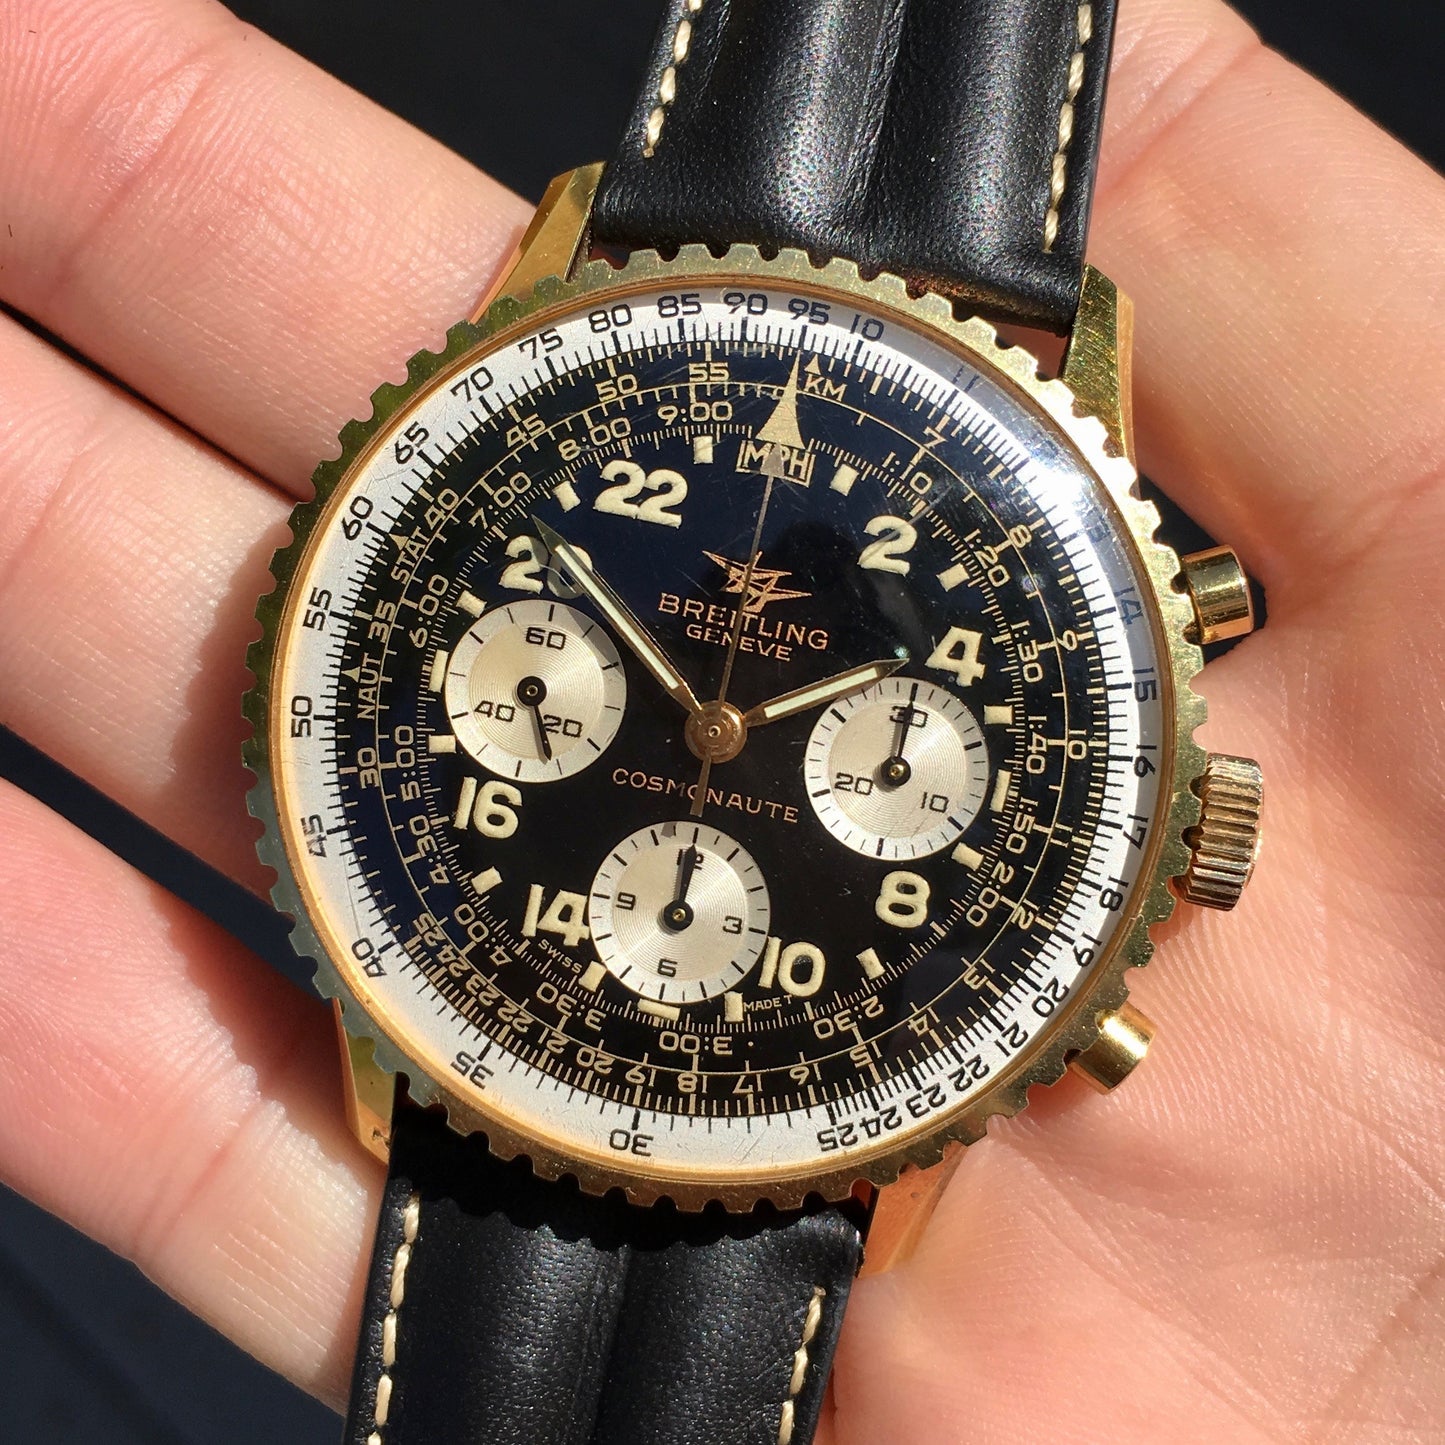 Vintage Breitling Navitimer 809 Cosmonaute Chronogrpaph Gold Filled LNOS Wristwatch - Hashtag Watch Company